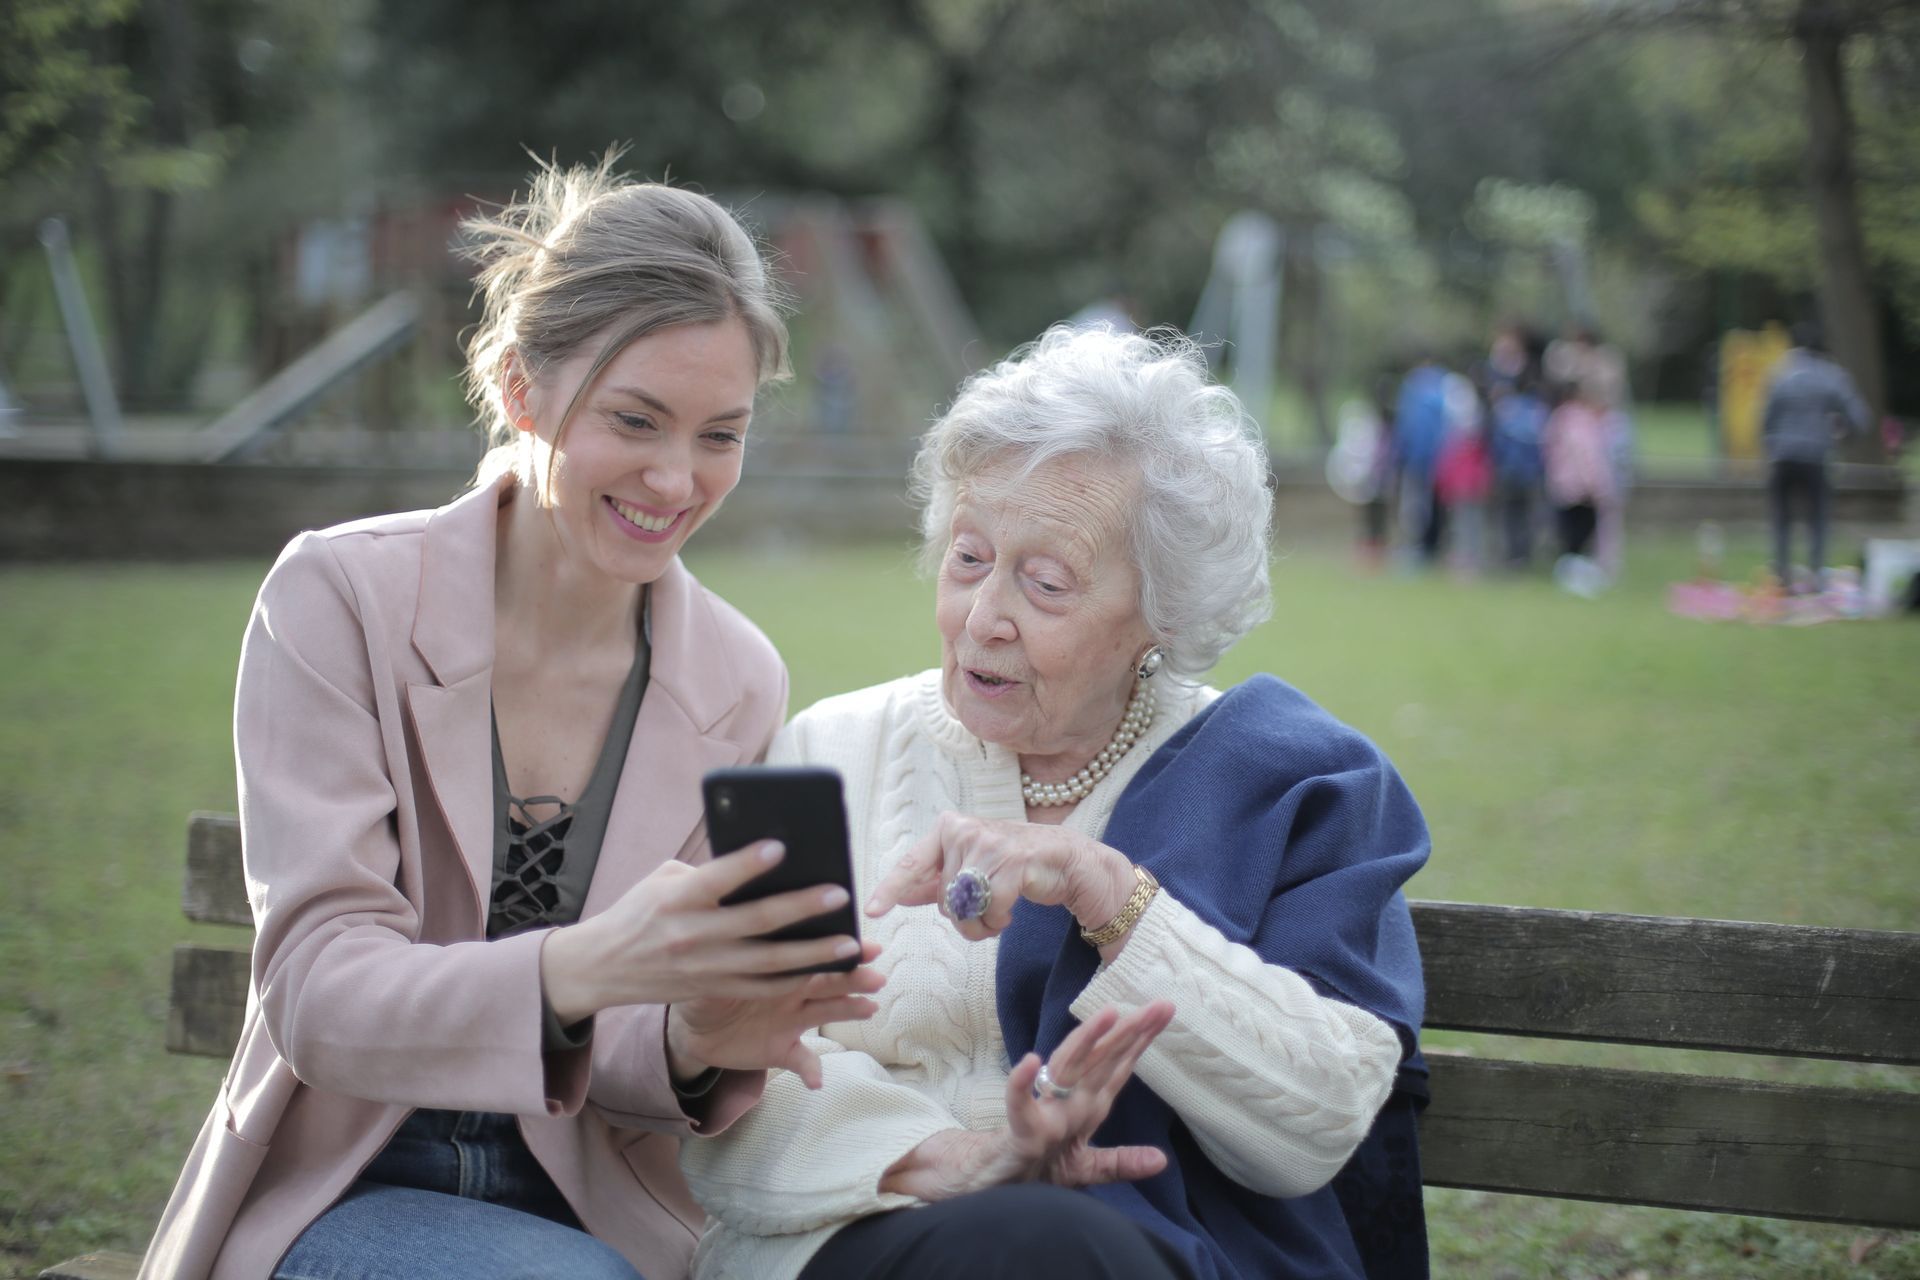 a young woman is showing an older woman how to use a cell phone.